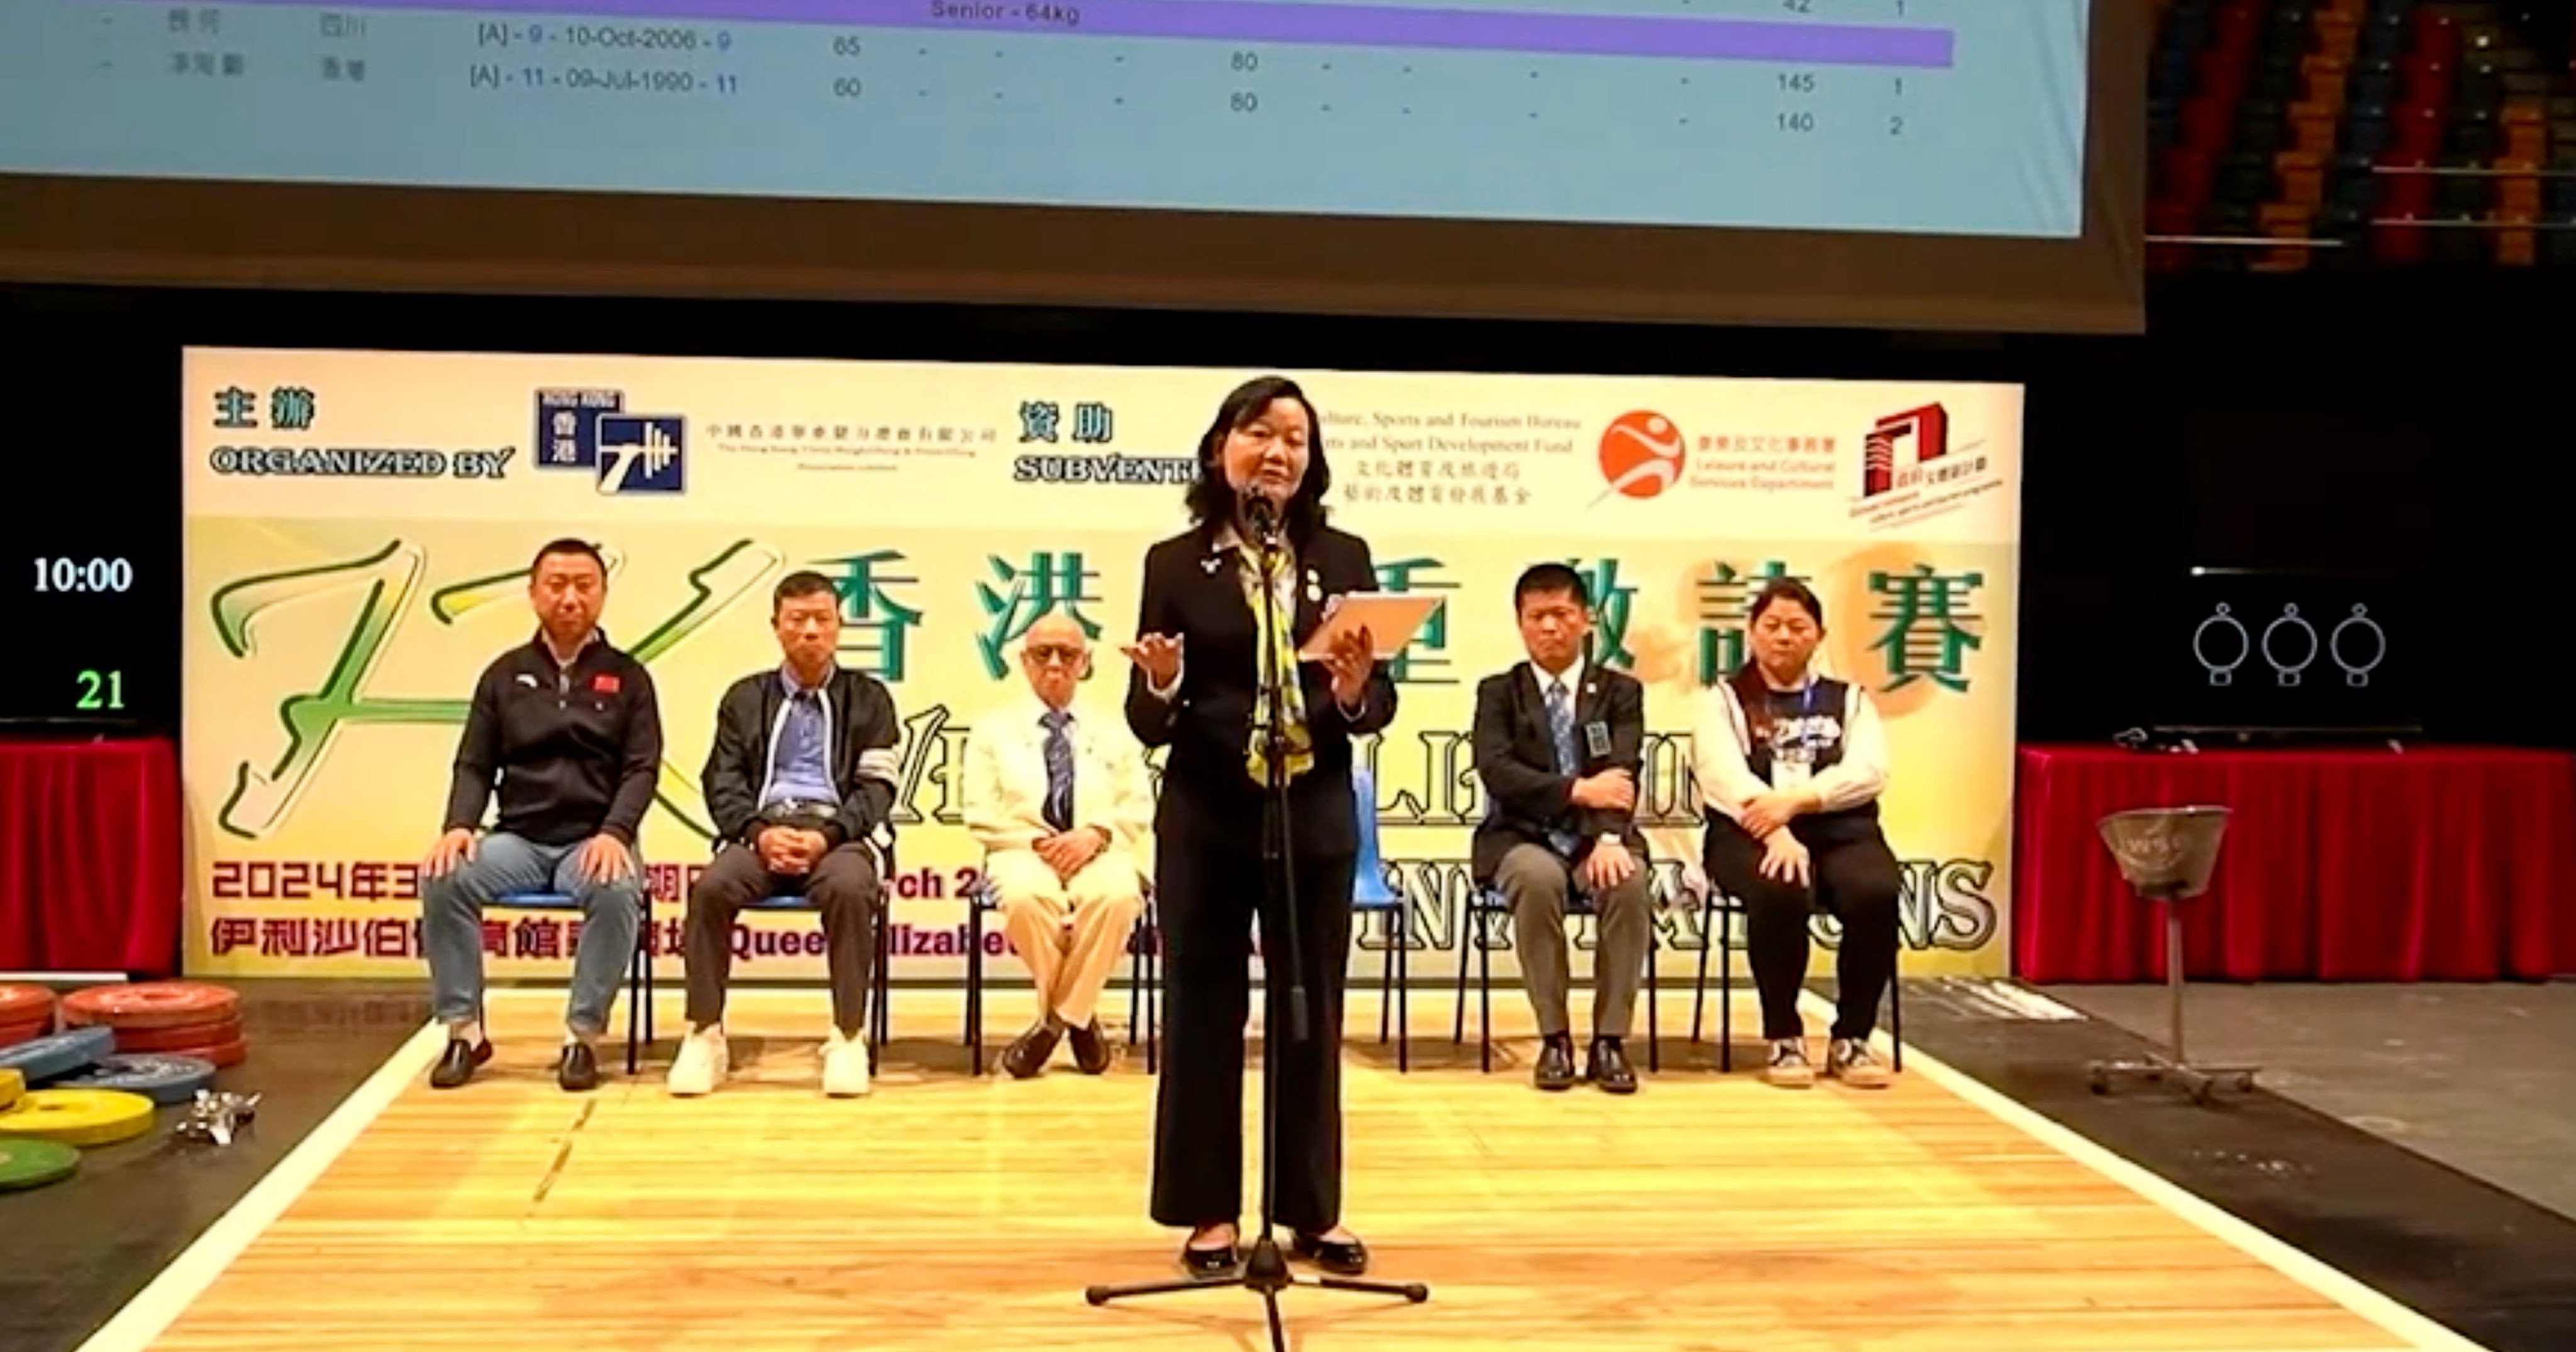 Chairwoman of Hong Kong’s weightlifting and powerlifting association Josephine Ip has apologised for calling Hong Kong “a small country”. Photo: YouTube/The Hong Kong, China Weightlifting and Powerlifting Association